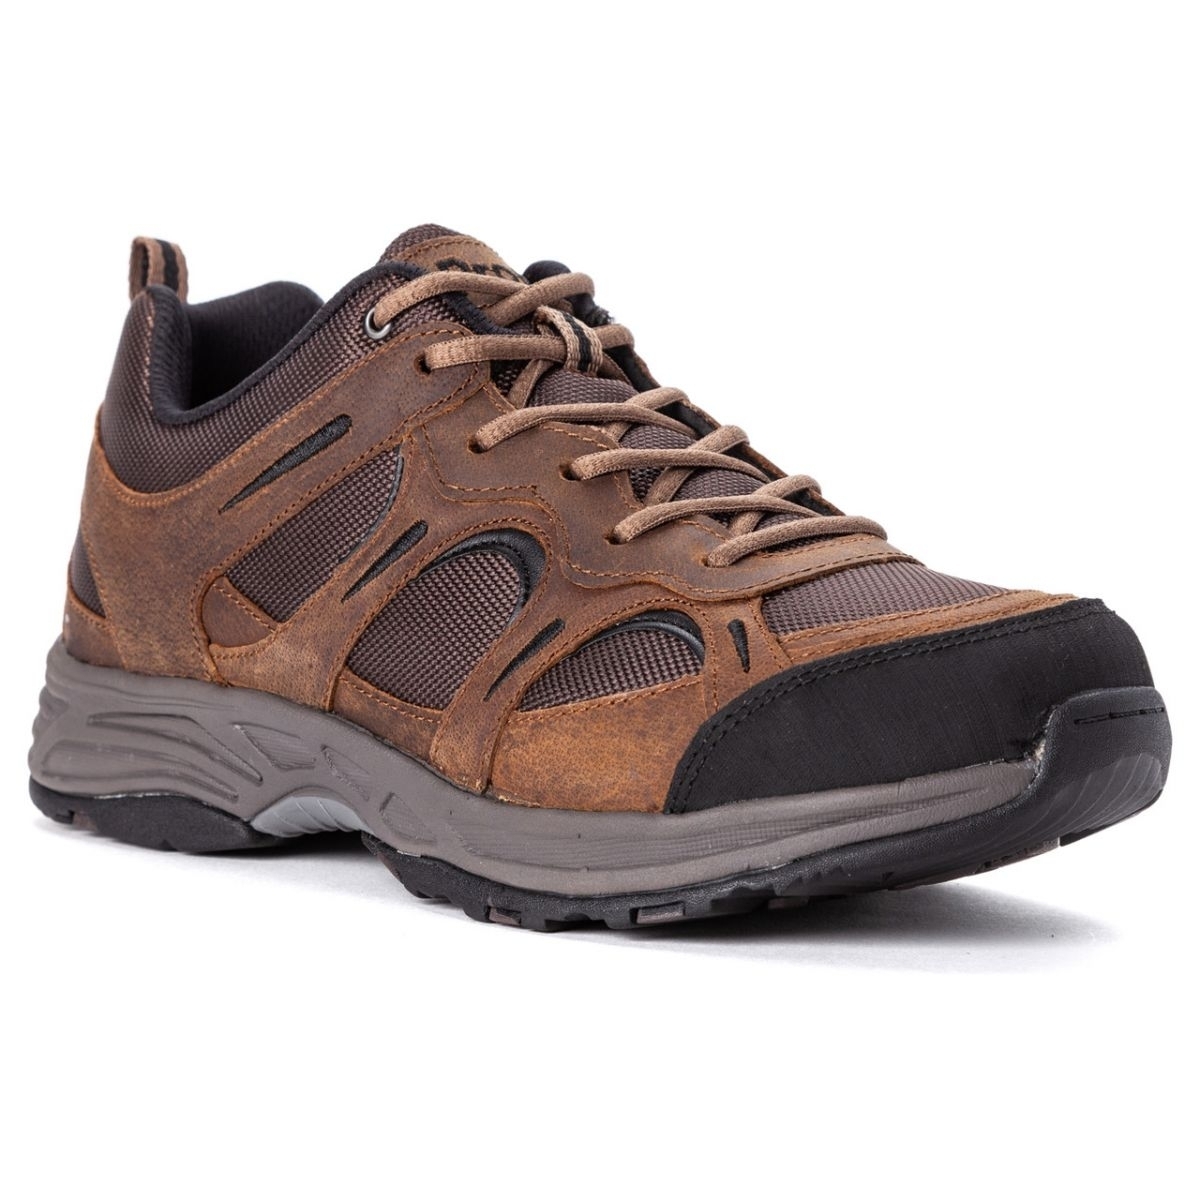 Propet Men's Connelly Hiking Shoe Brown - M5503BR BROWN - BROWN, 11.5-D